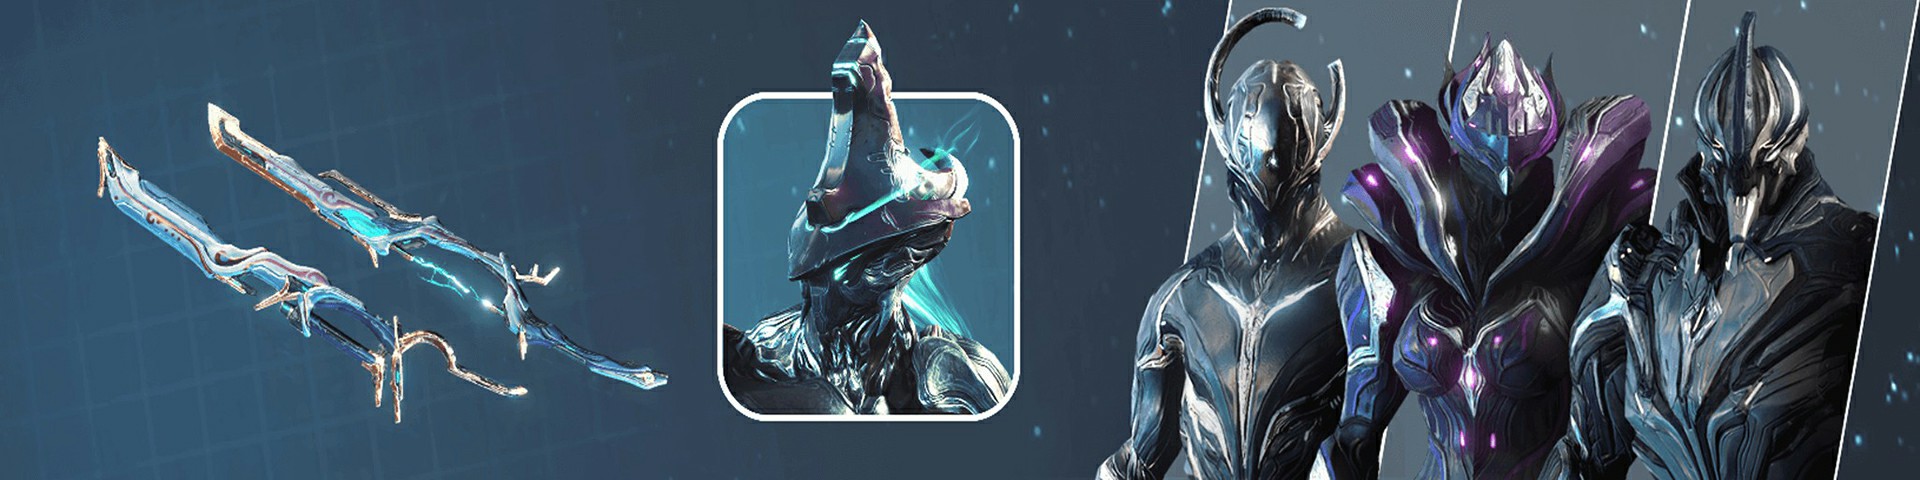 Warframe On Nintendo Switch Is Set To Get A Performance Boost In Update 25....